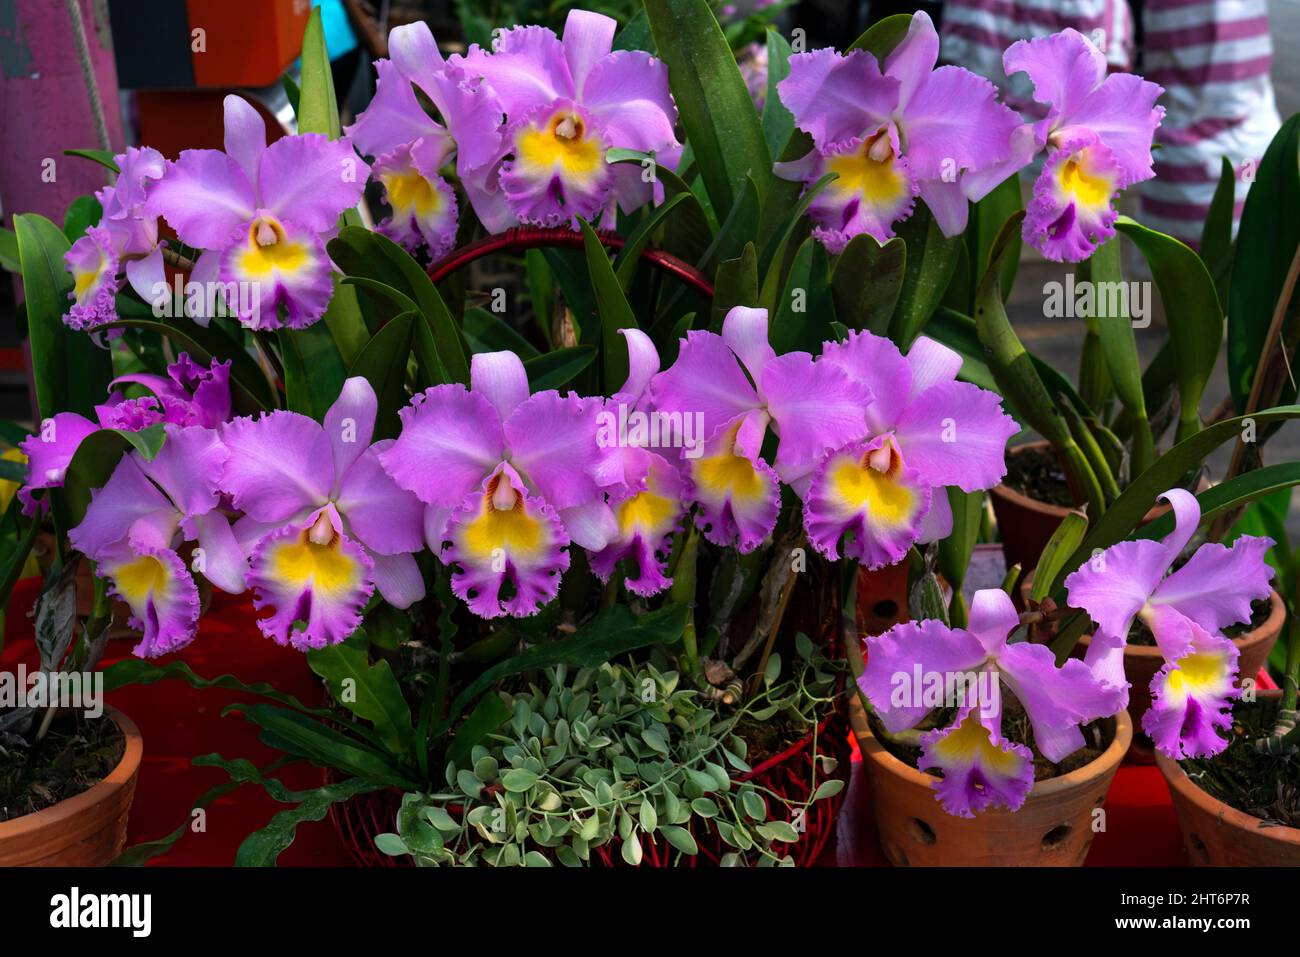 Pink cattleya flowers,Isolated pink color flowers blooming bouquet. Wild cattleya orchid plant growing in pot for home care. Stock Photo